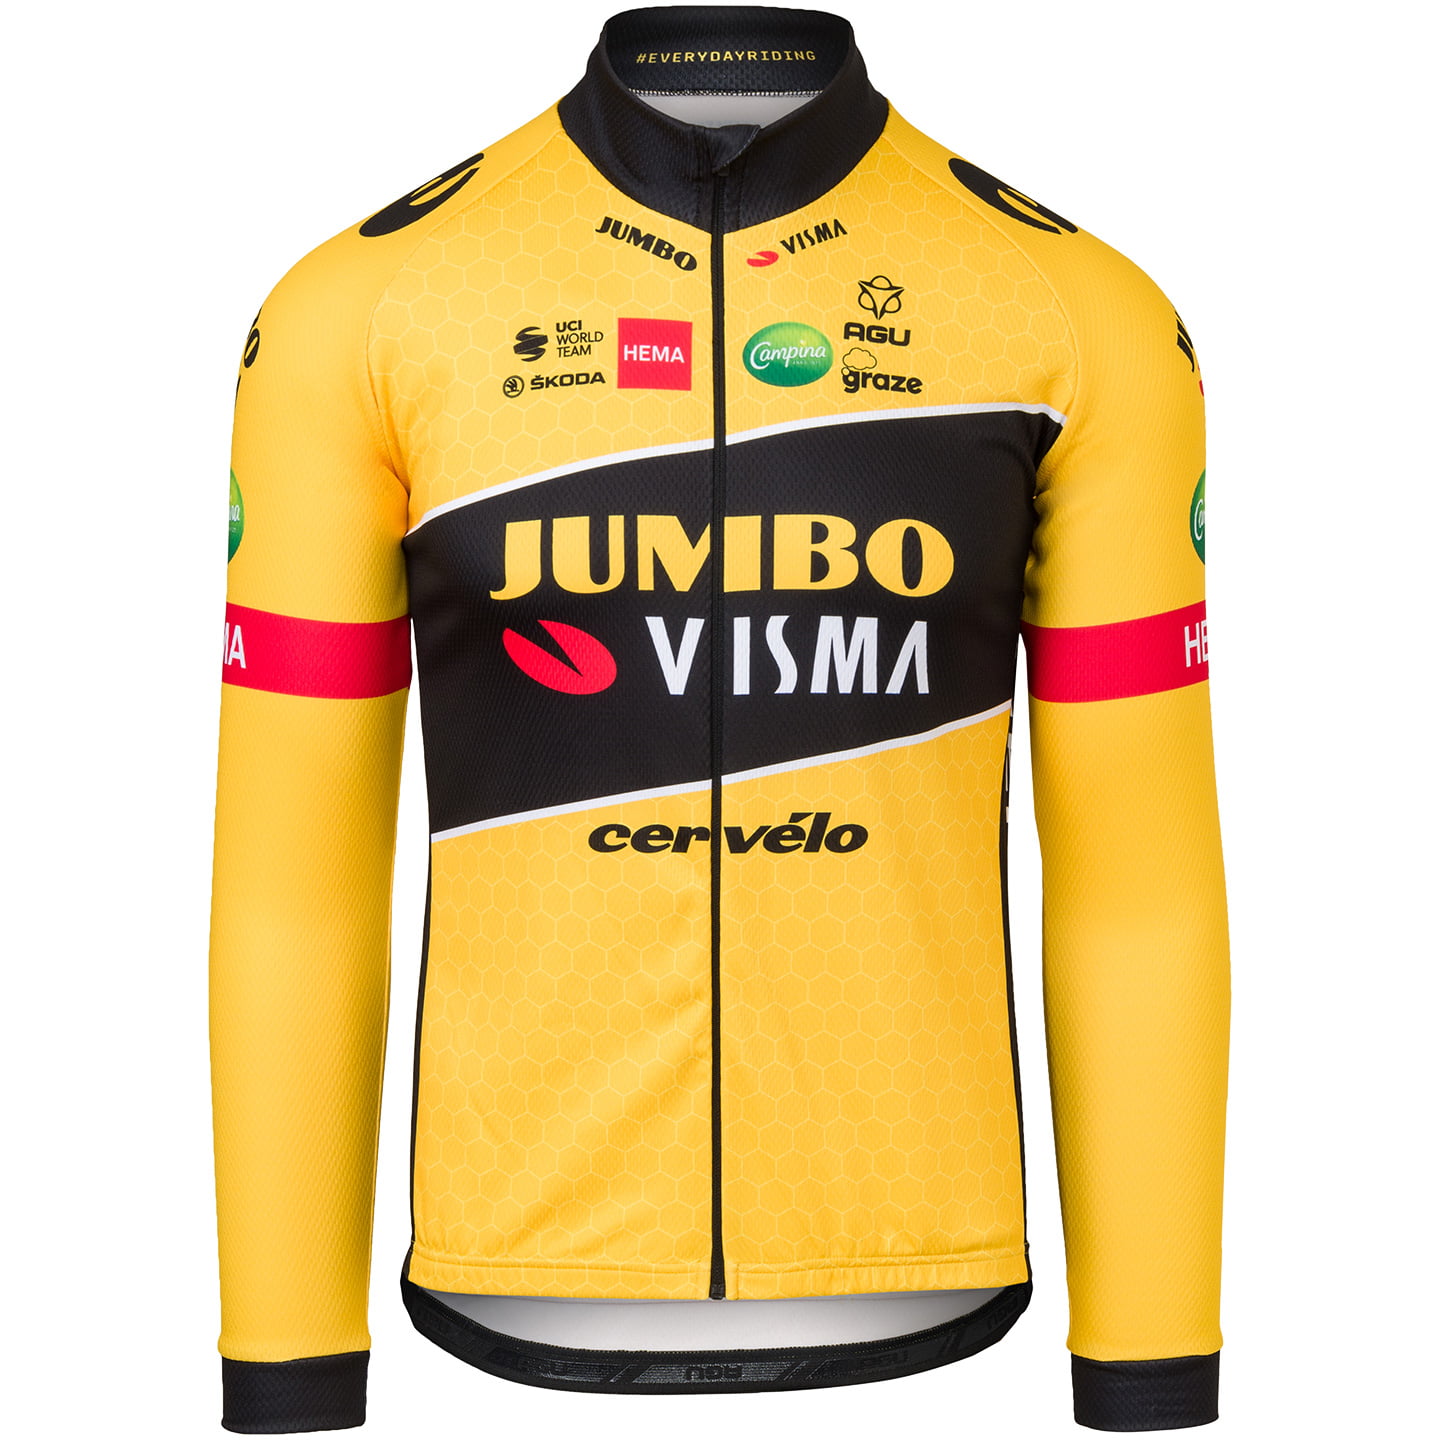 TEAM JUMBO-VISMA 2022 Long Sleeve Jersey, for men, size S, Cycling jersey, Cycling clothing